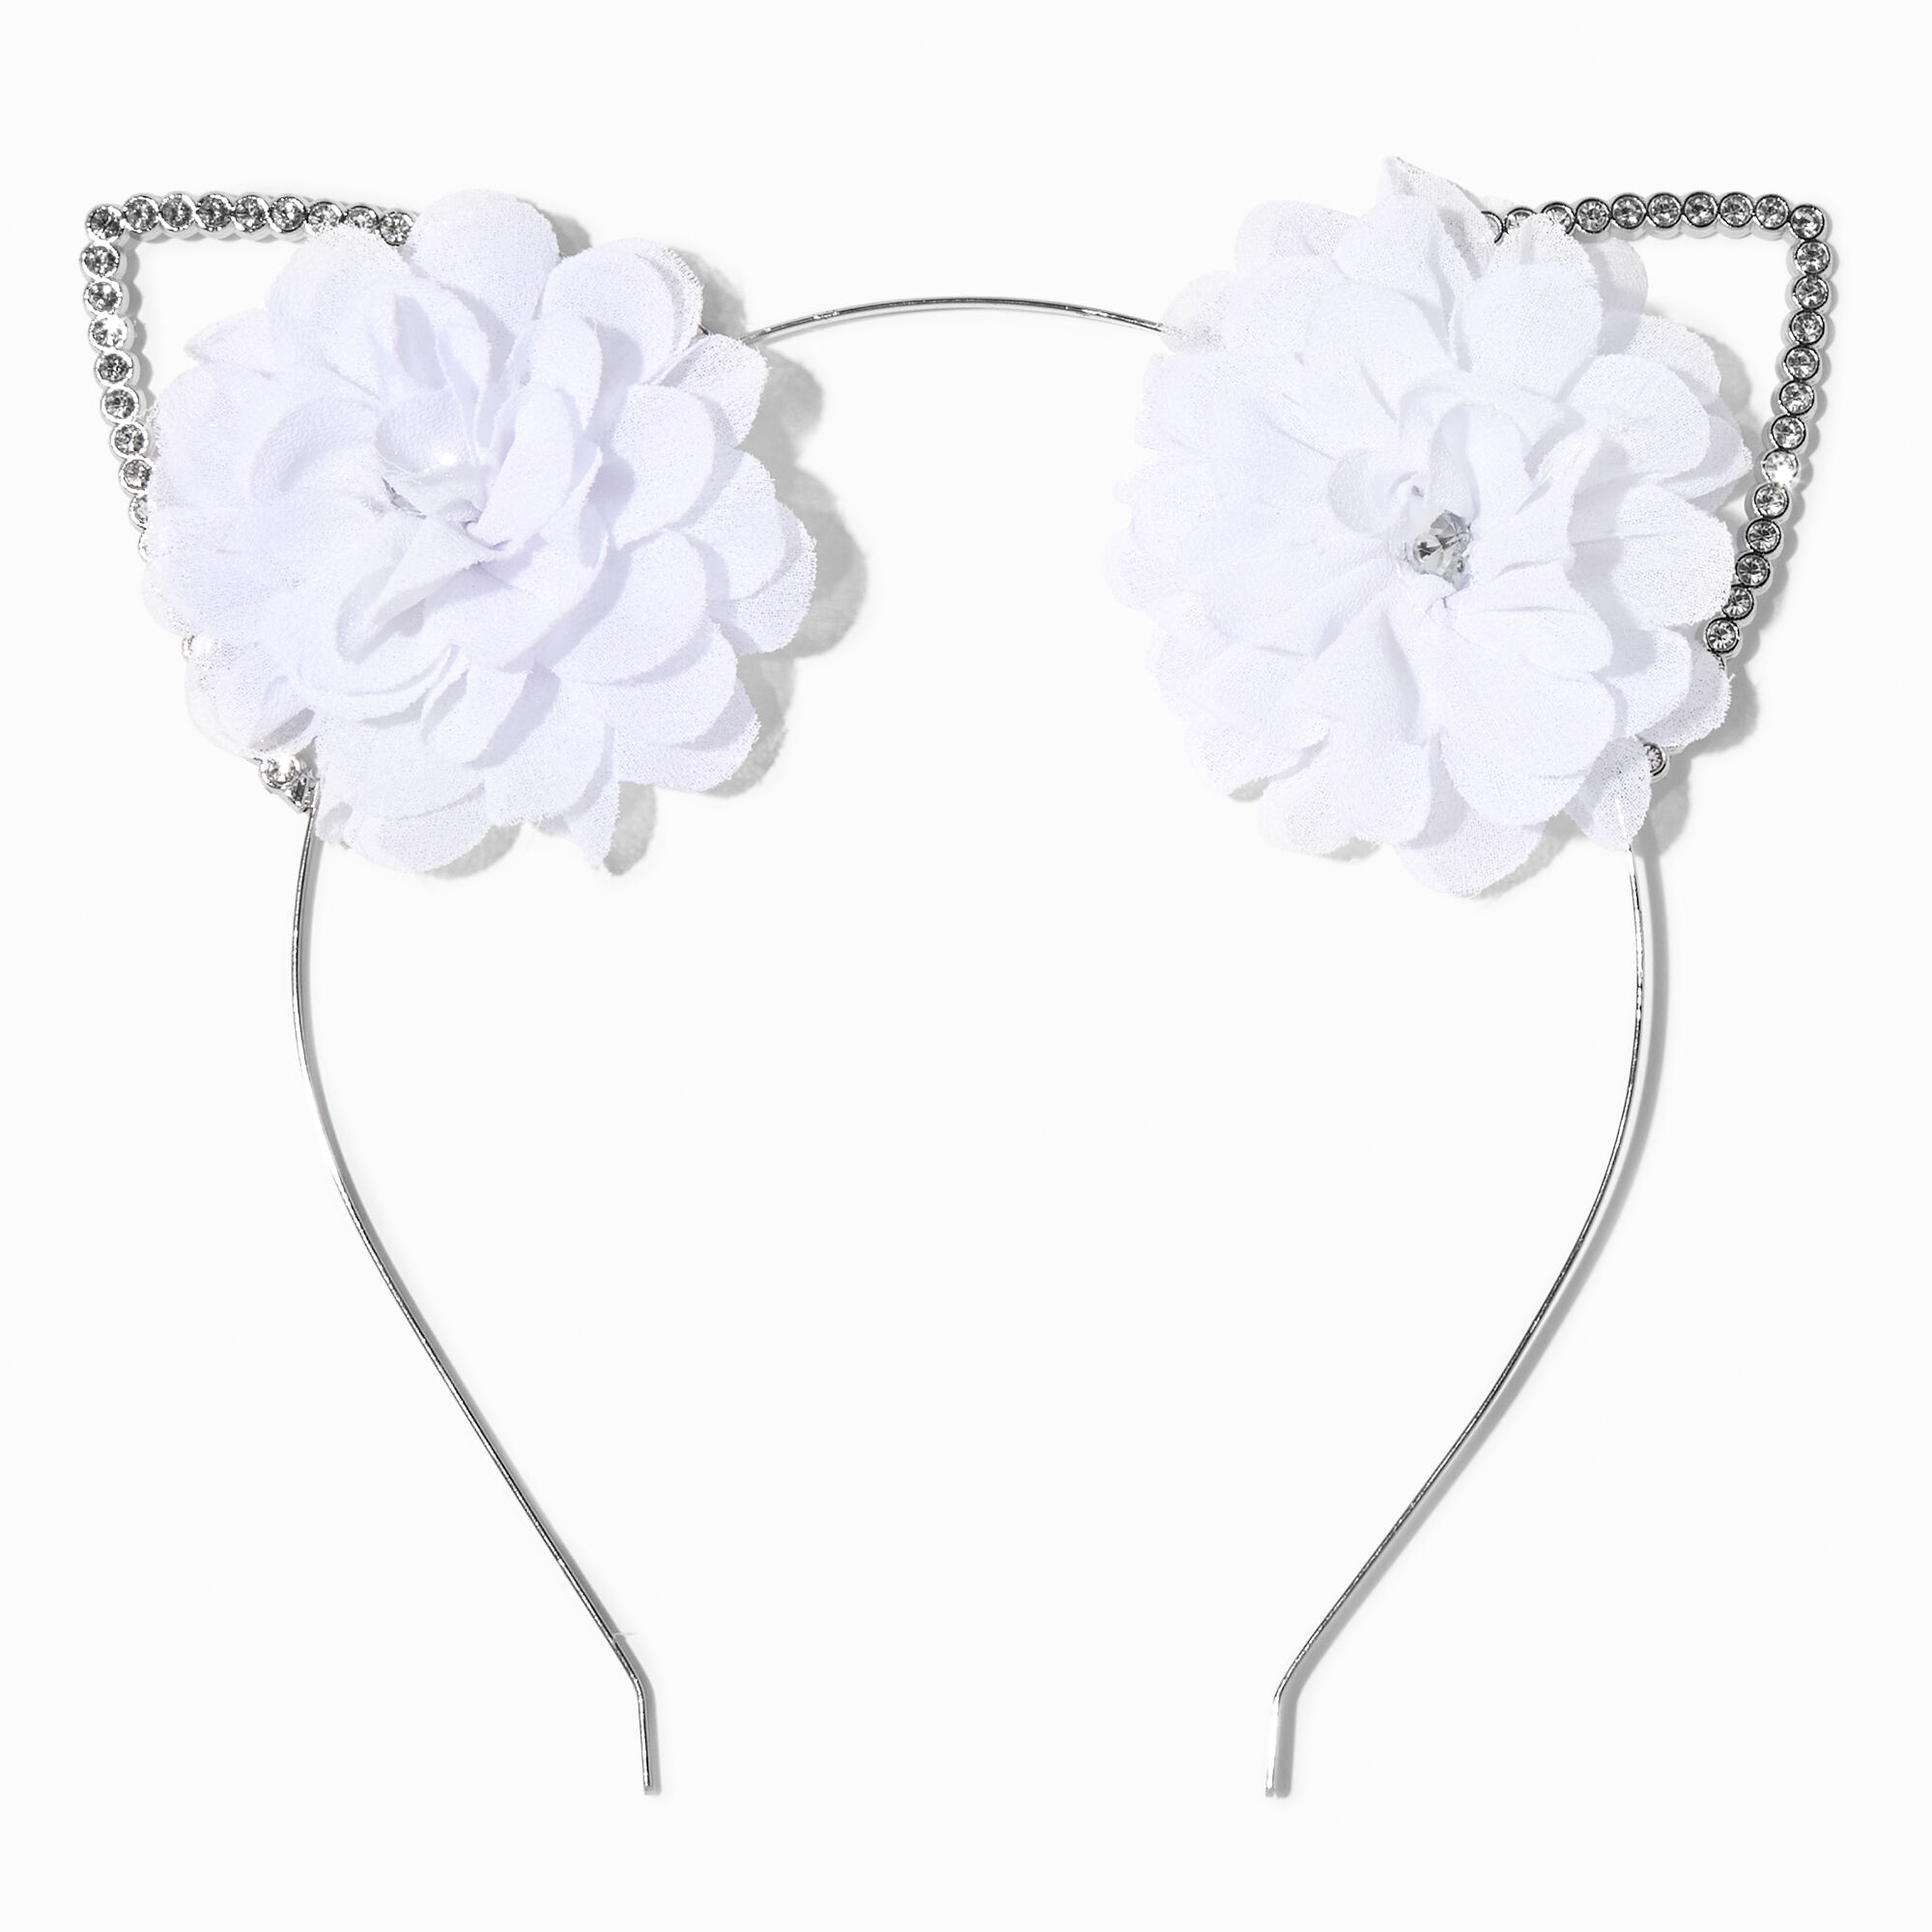 View Claires Rosette Crystal Silver Cat Ears Headband White information